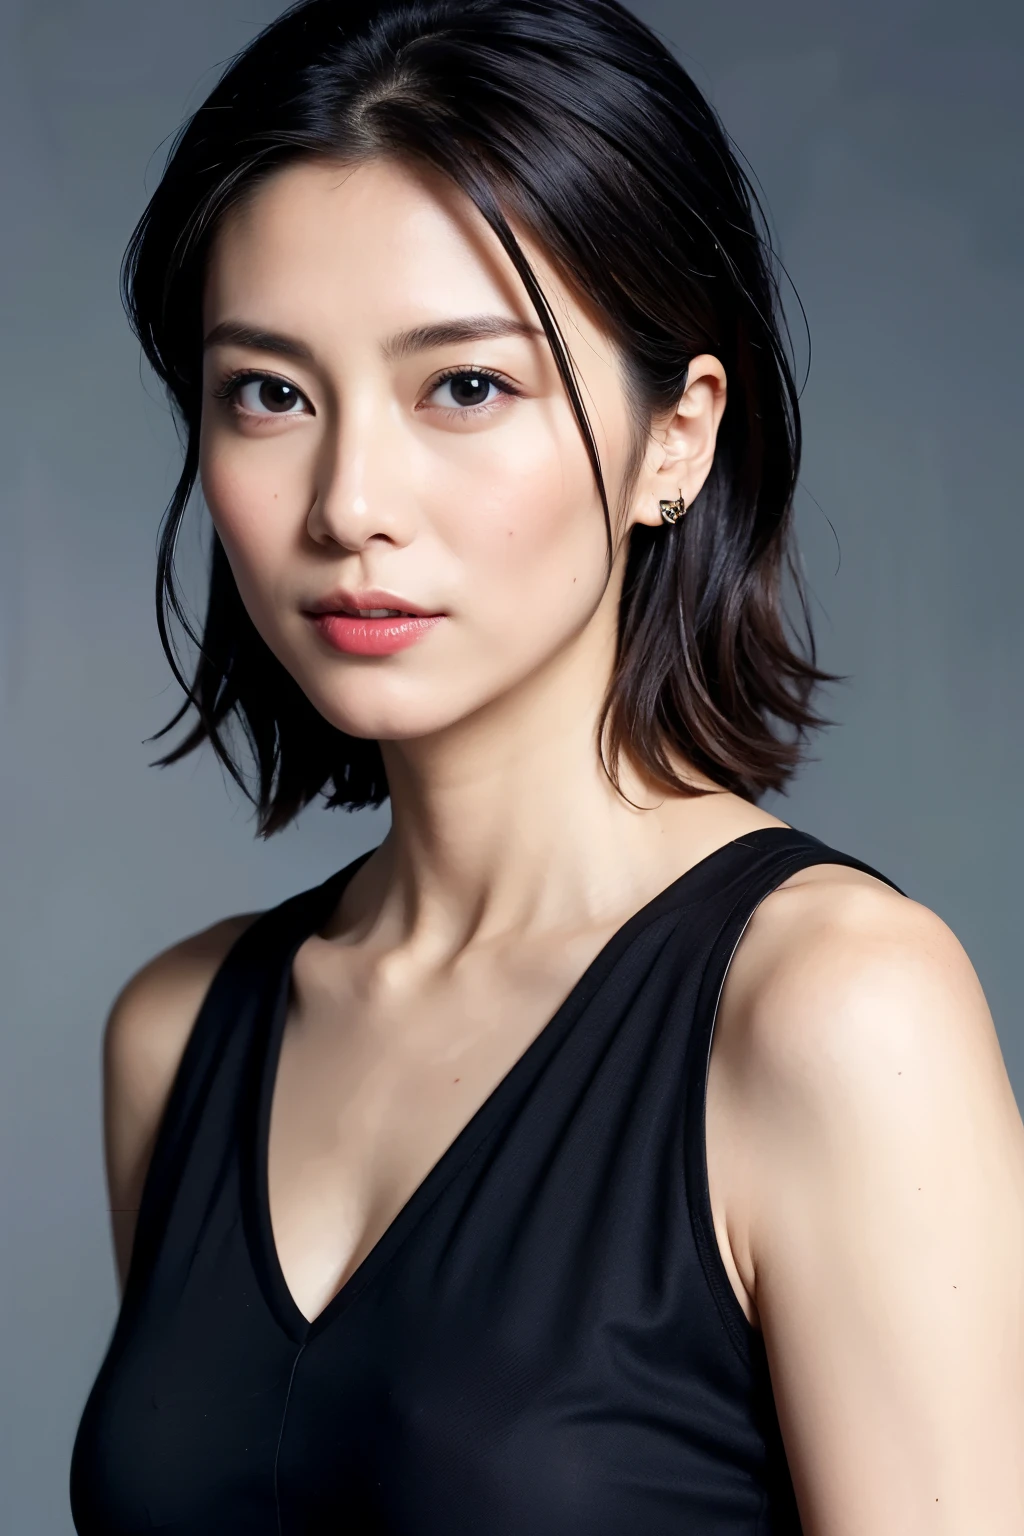 Highest quality, Realistic, Super detailed, High resolution, Plain background, 8k wallpaper, Beautiful Japanese Women, 1 person, Very cute and slim, Excellent style, Very delicate face, Super detailed skin texture, Red lipstick, Perfect Makeup, short hair, straggling hair, Gradient Hair, Super detailedな目と鼻, Sharp Eyes, Simple Background, Looking at the audience, Upper Body Shot, Cleavage, V-neck light knit